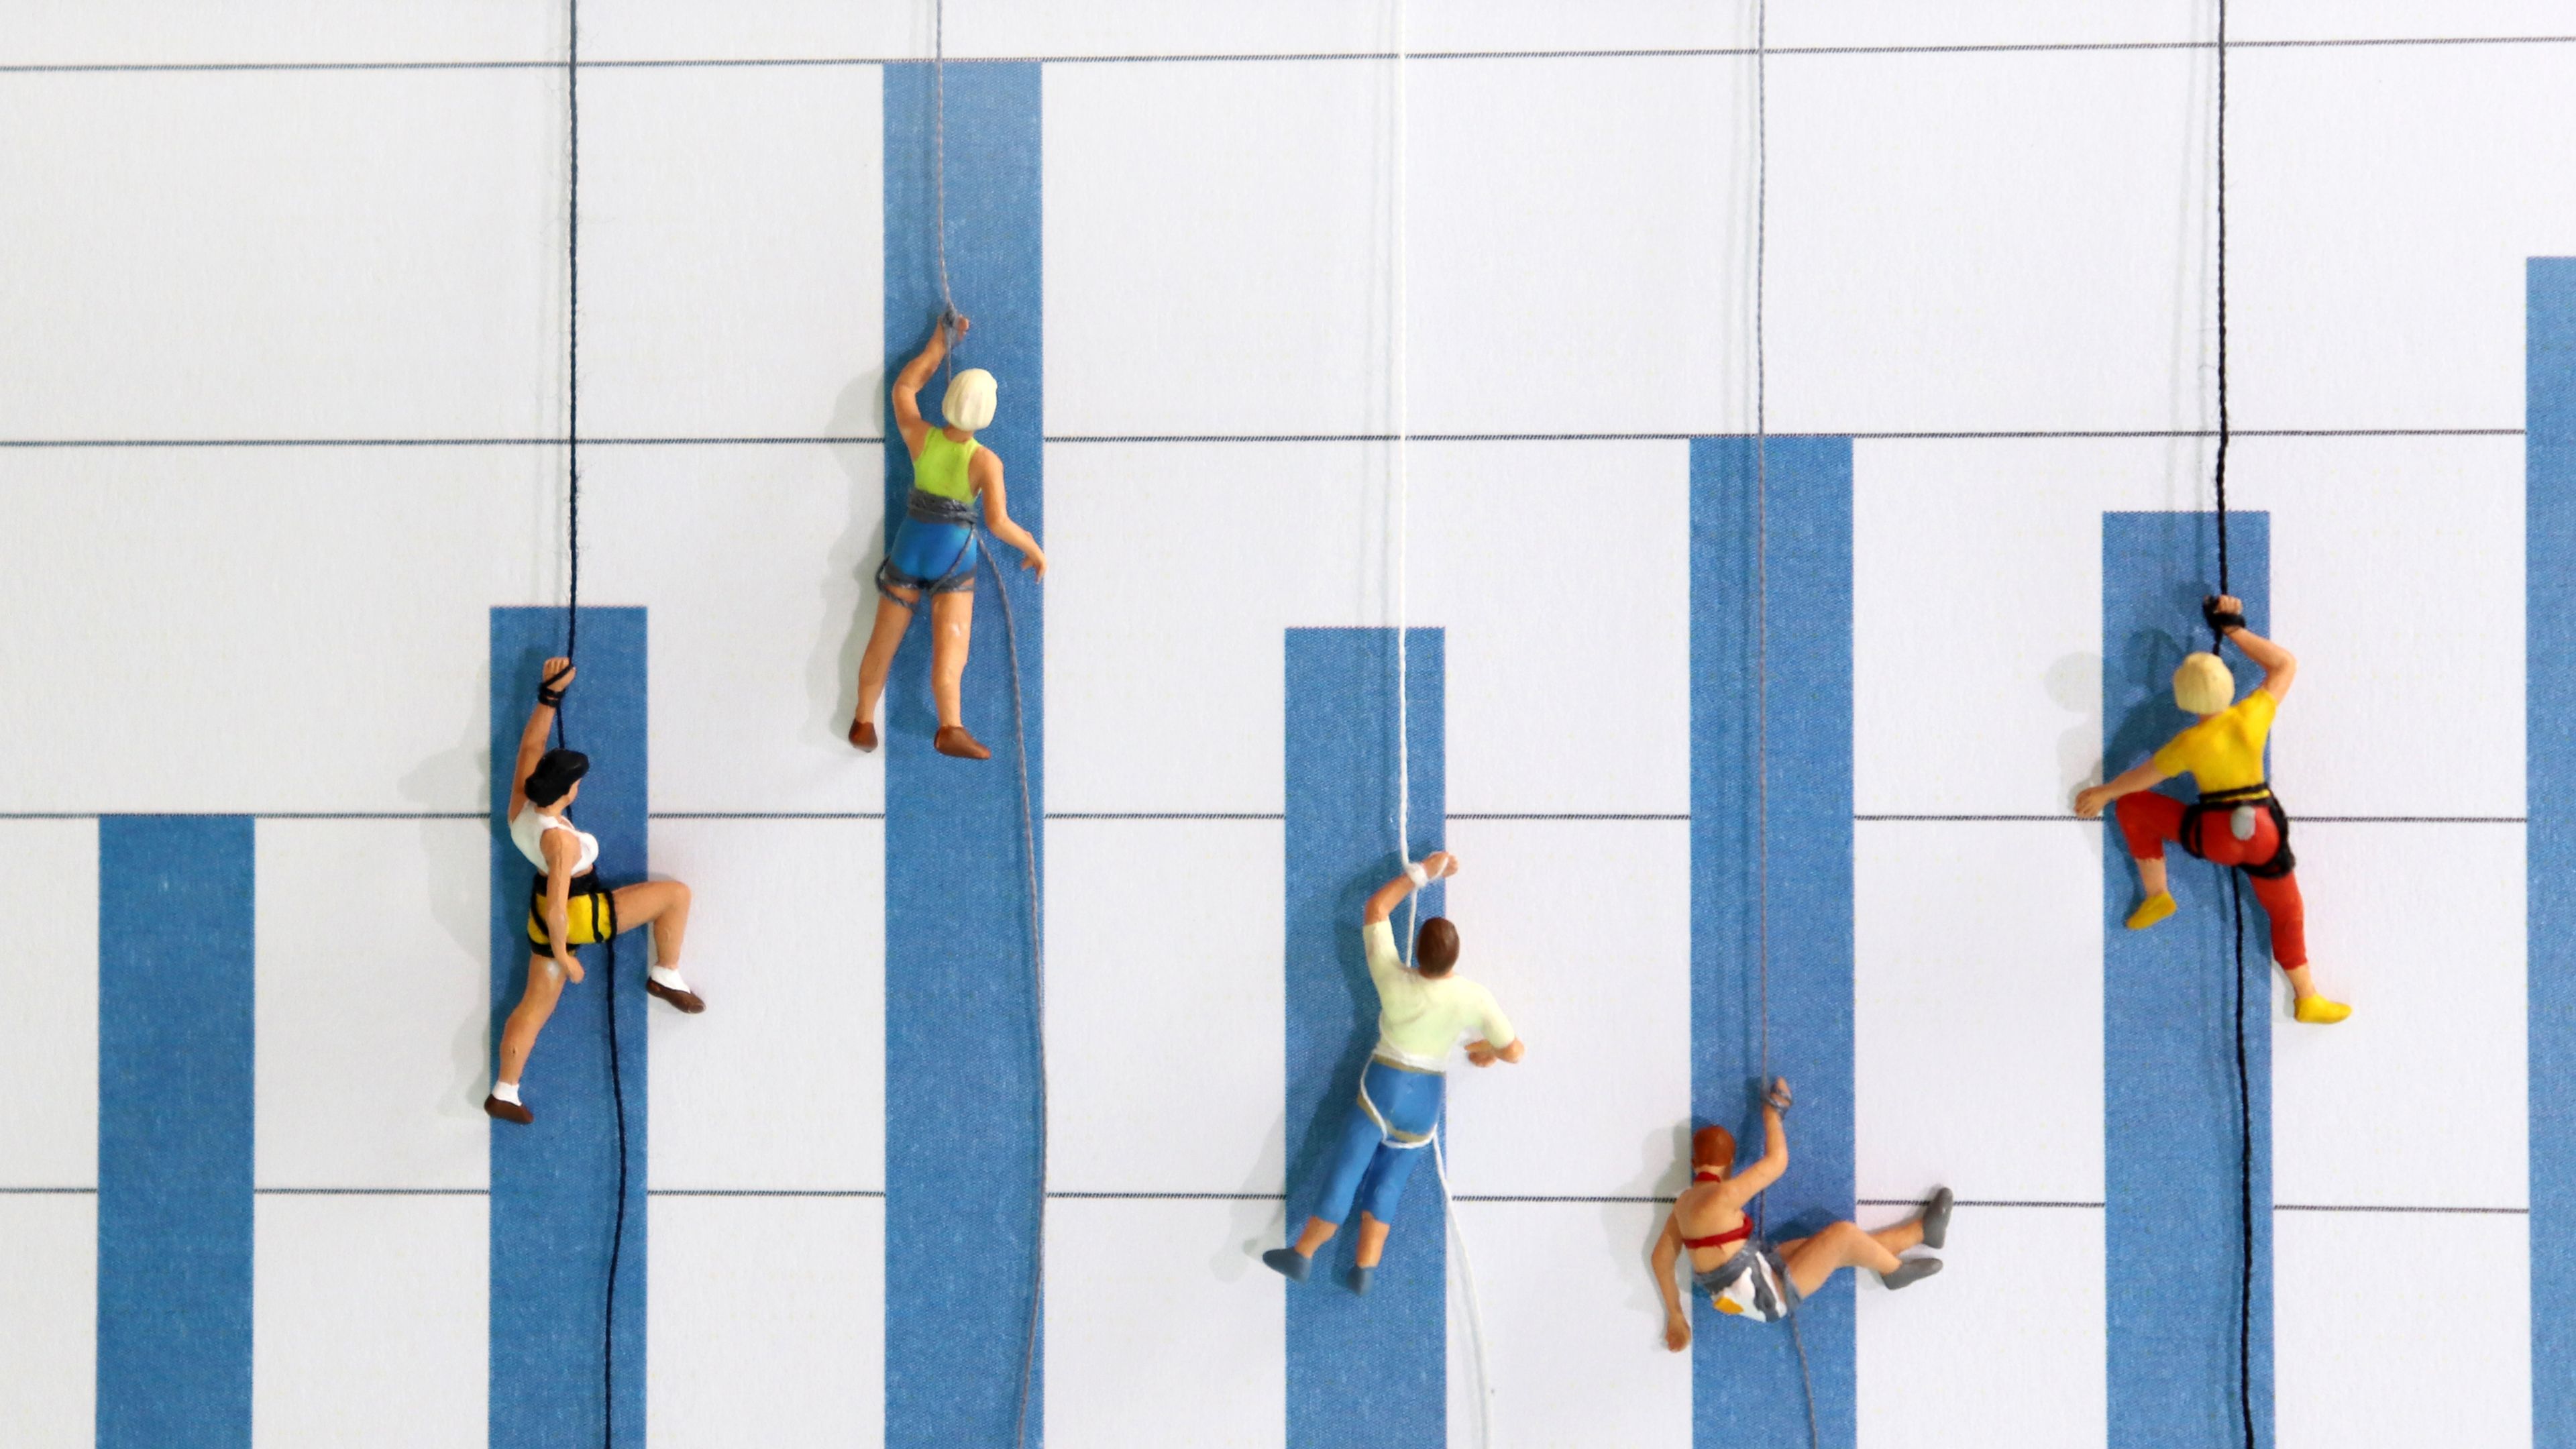 Models of people climbing a wall, but the wall is a bar chart